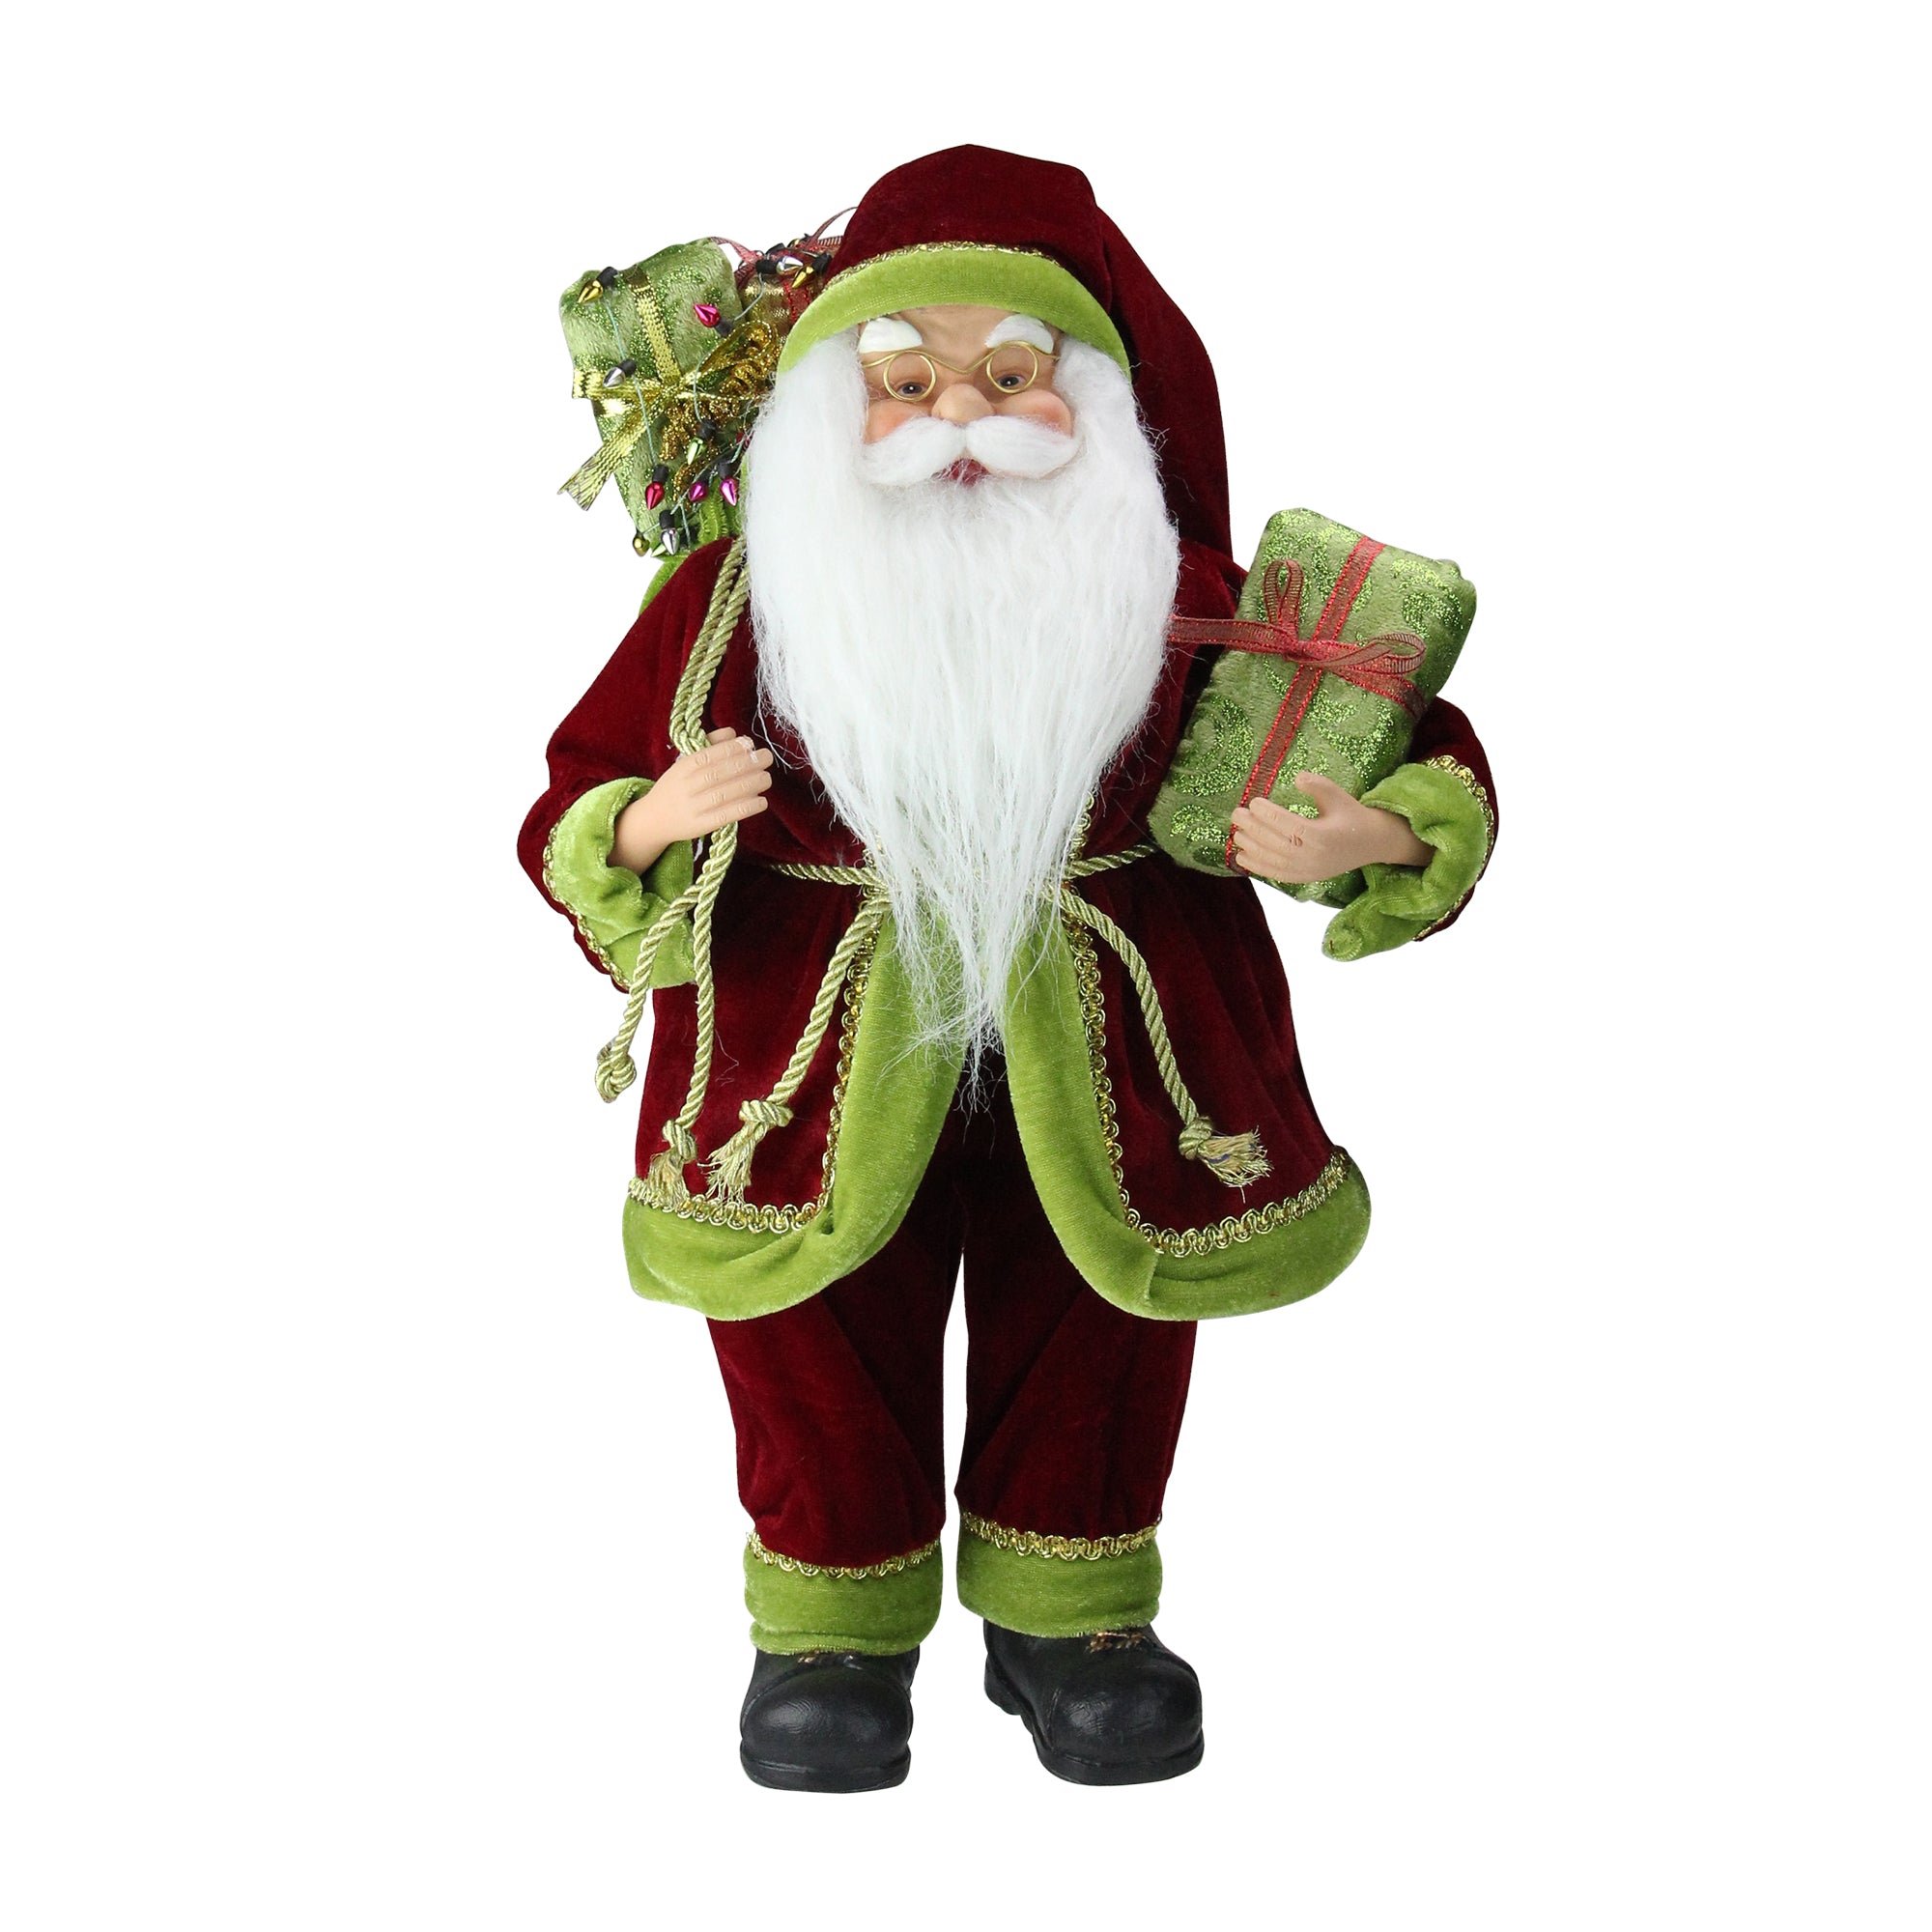 16 Inch Grand Imperial Red Green And Gold Standing Santa Claus Christmas Figure With Gift Bag